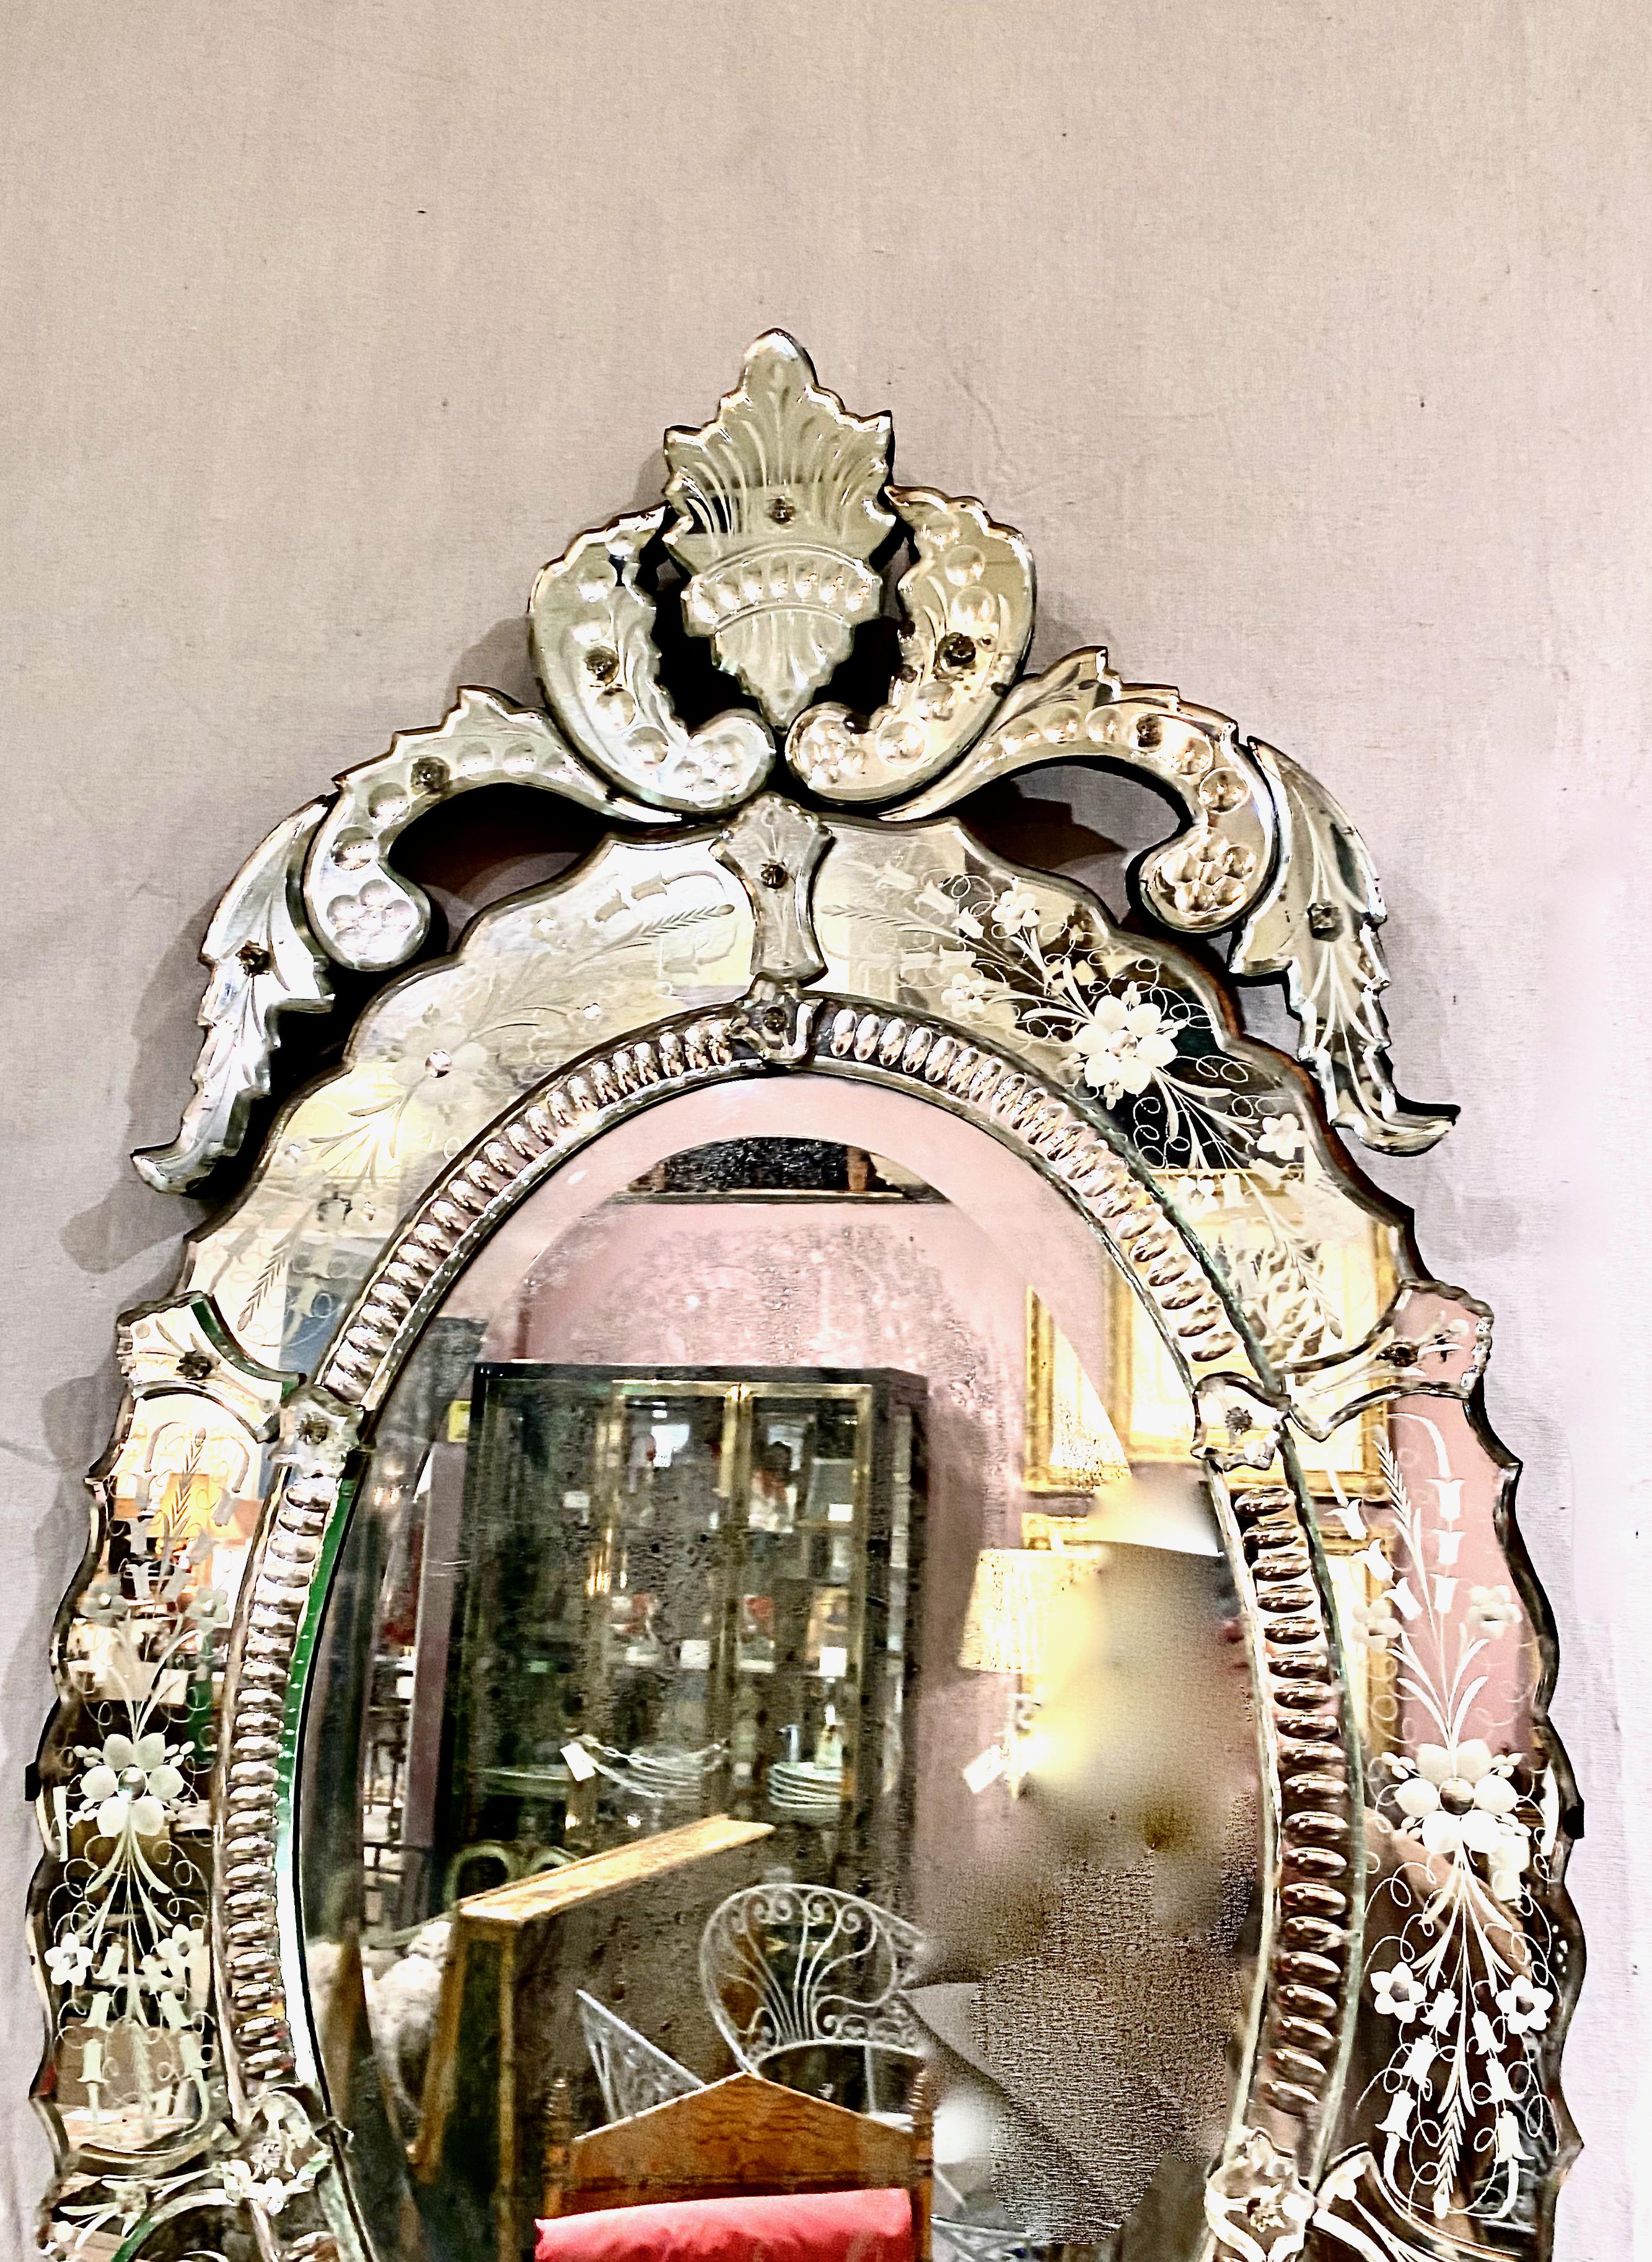 This is a good example of an early 20th century Oval Venetian mirror that is beautifully detailed with a cut scrolling and etched mirror surrounding the central mirror plate. the oval body is surmounted by a cut acanthus leaf scrolling crown. All